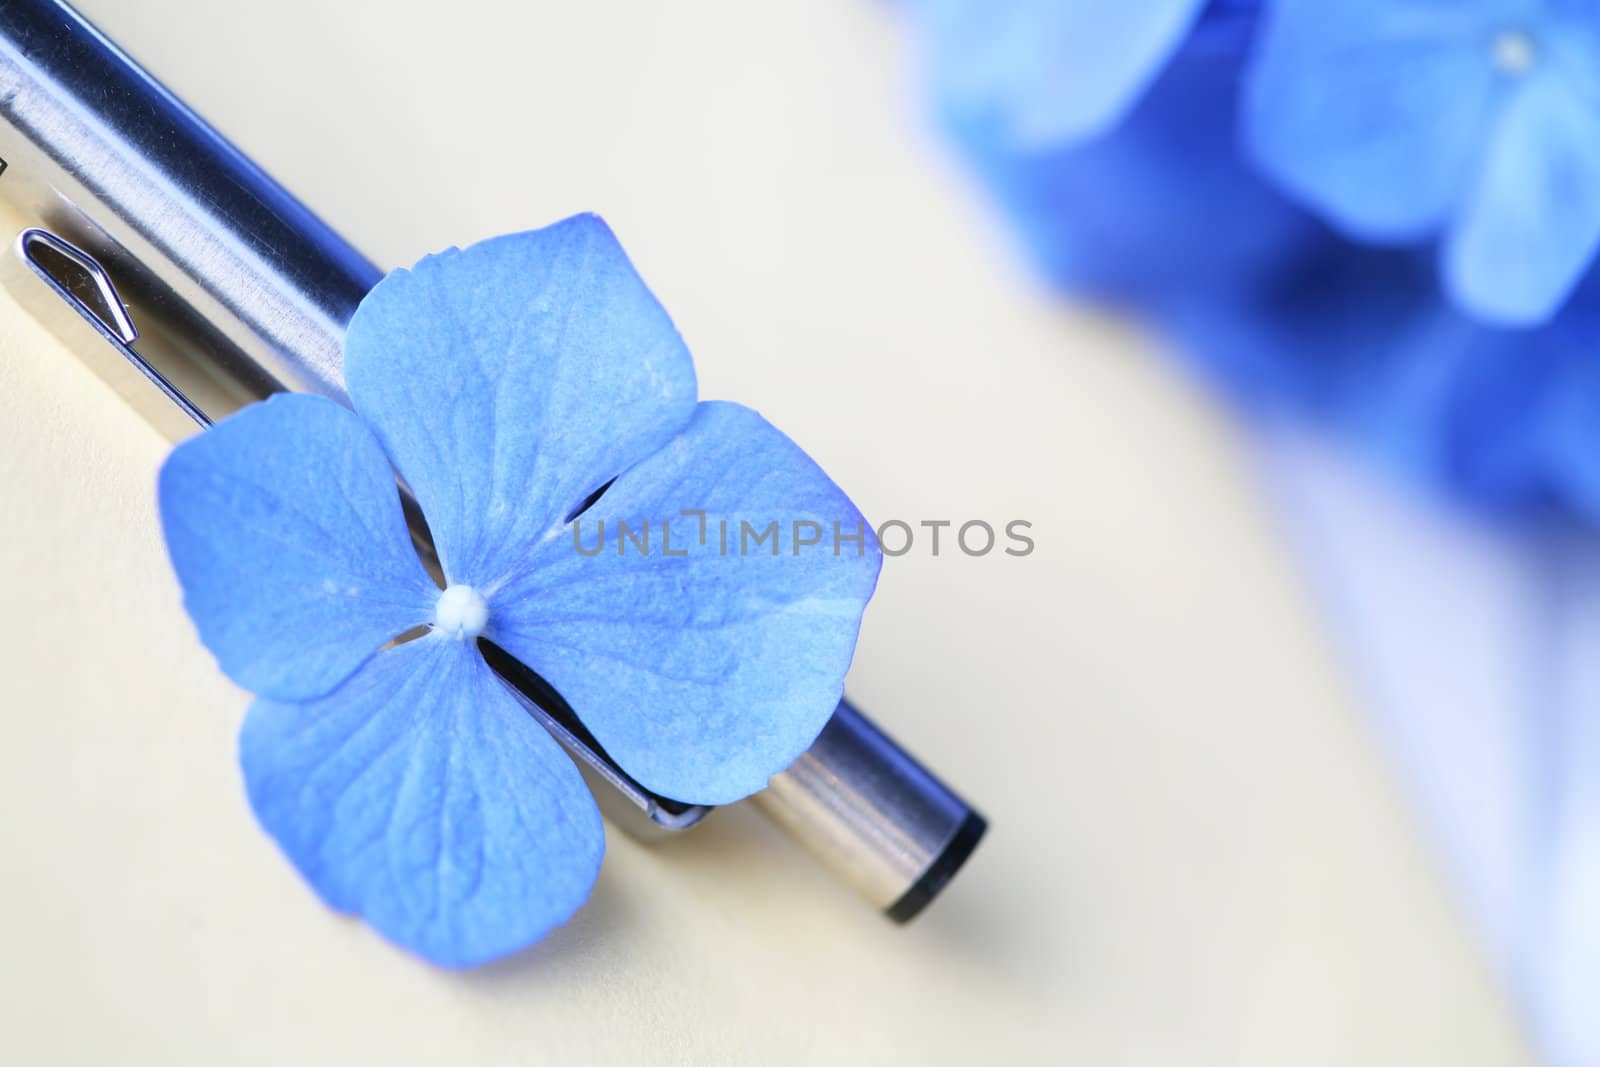 Shallow focus of hydrangea flower against a pen and paper statio by jarenwicklund